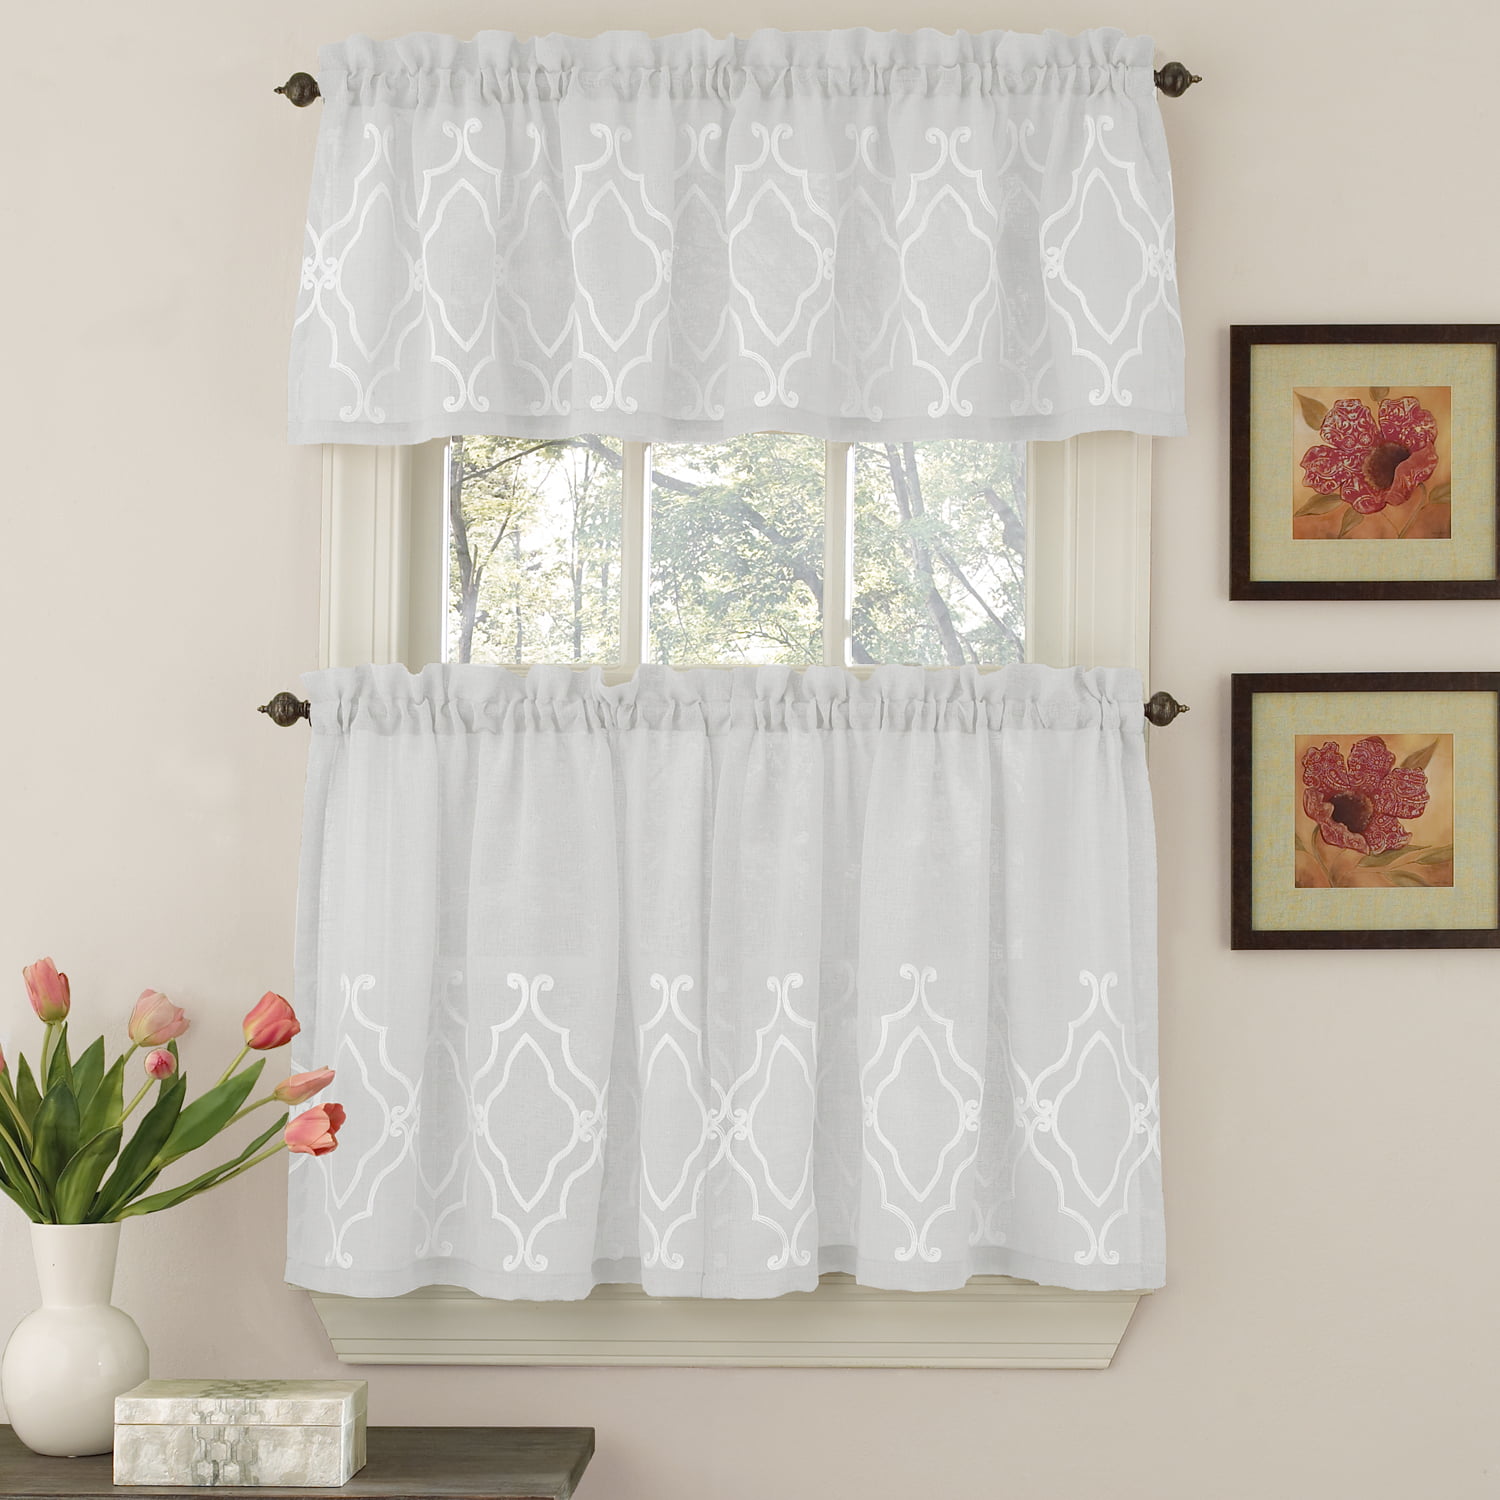 Adler Details about   Embroidered Curtains Set:2 Tiers 28"x36" & Valance 56x15" SILVER LEAVES 